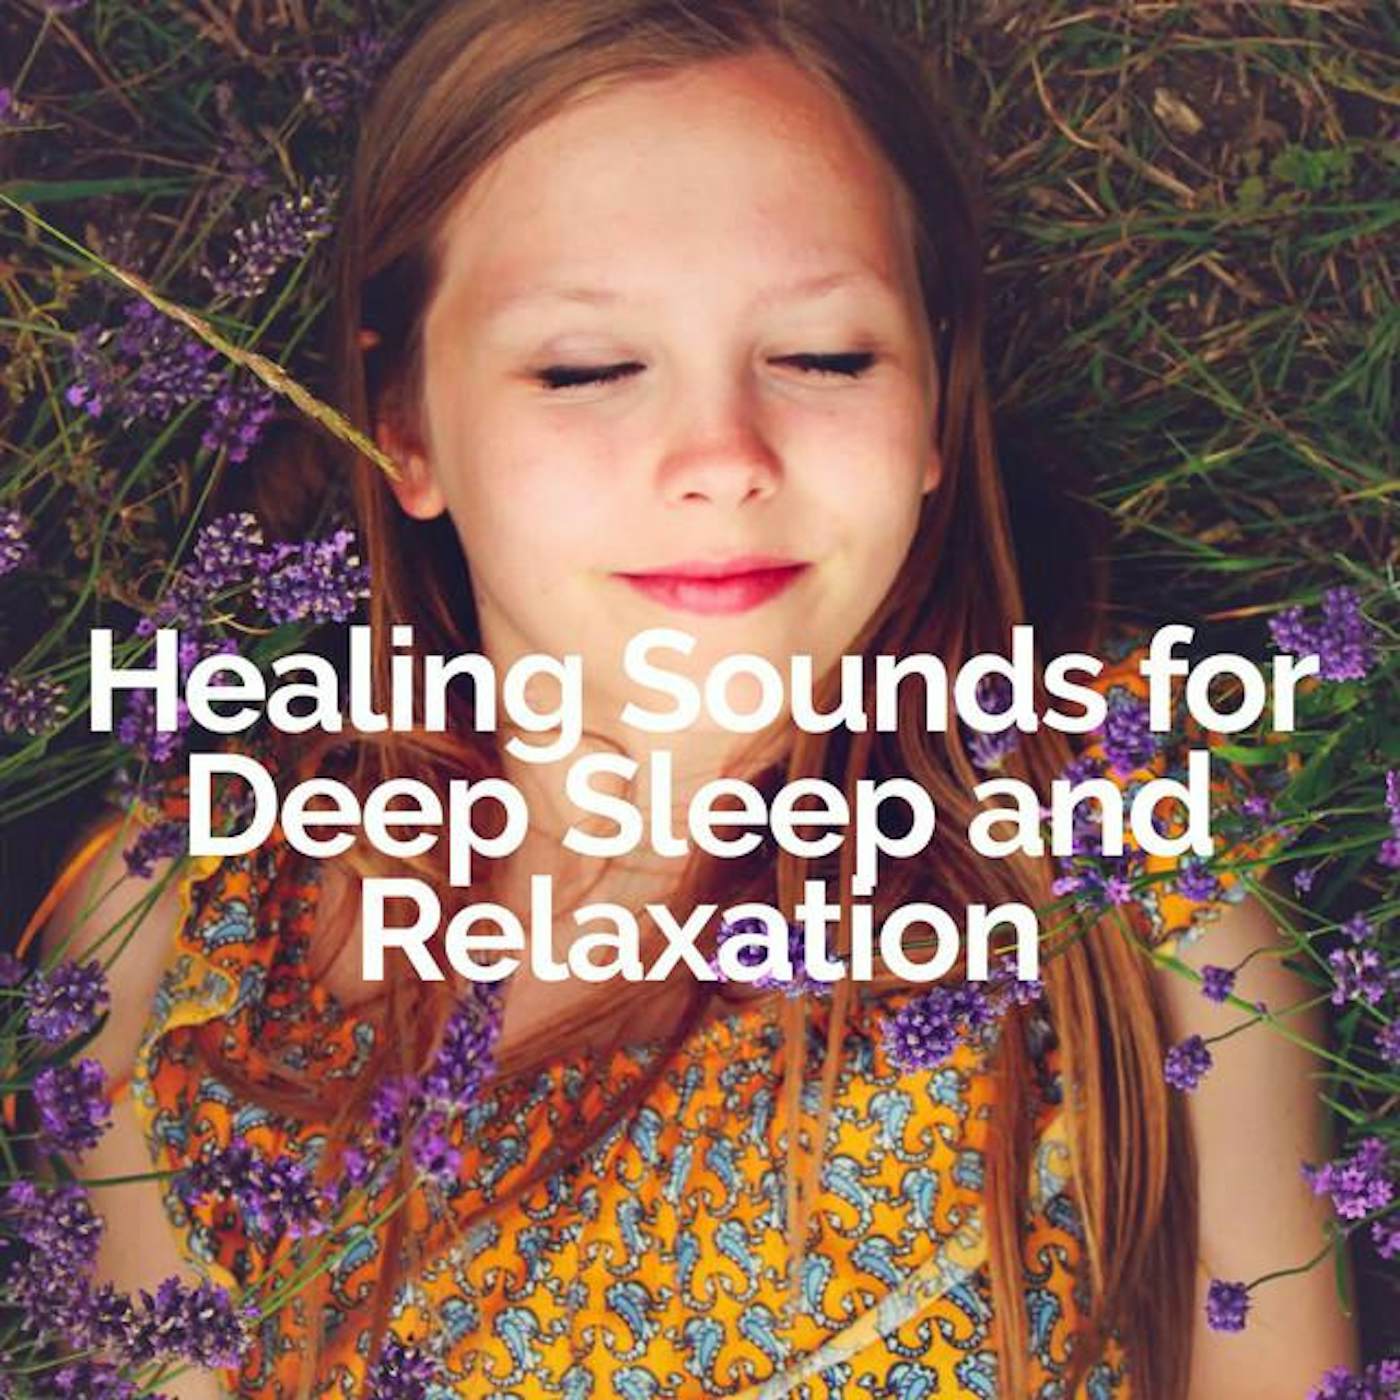 Healing Sounds for Deep Sleep and Relaxation